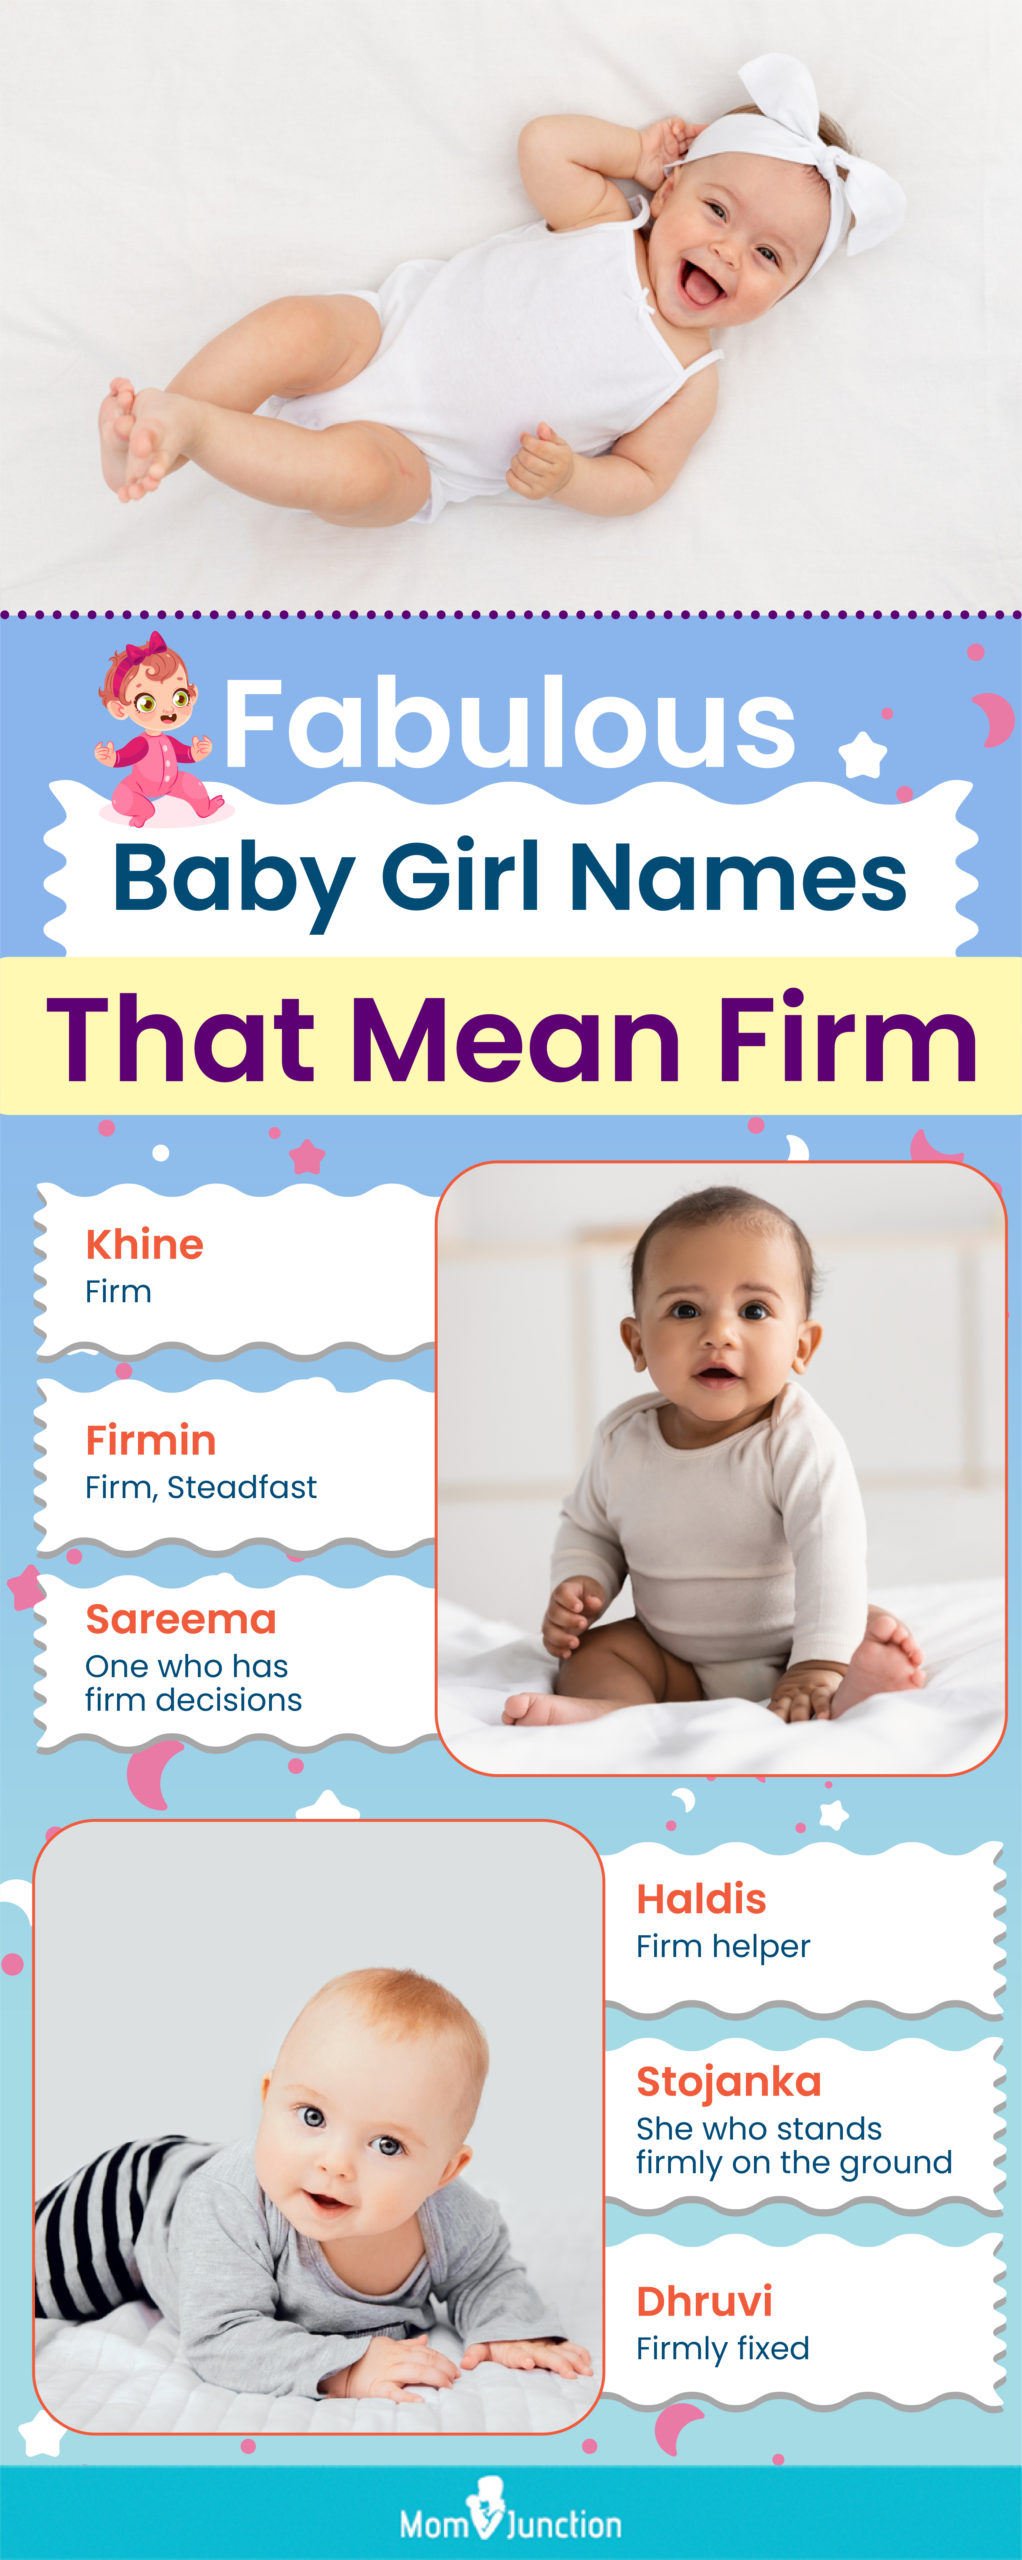 fabulous baby girl names that mean firm (infographic)